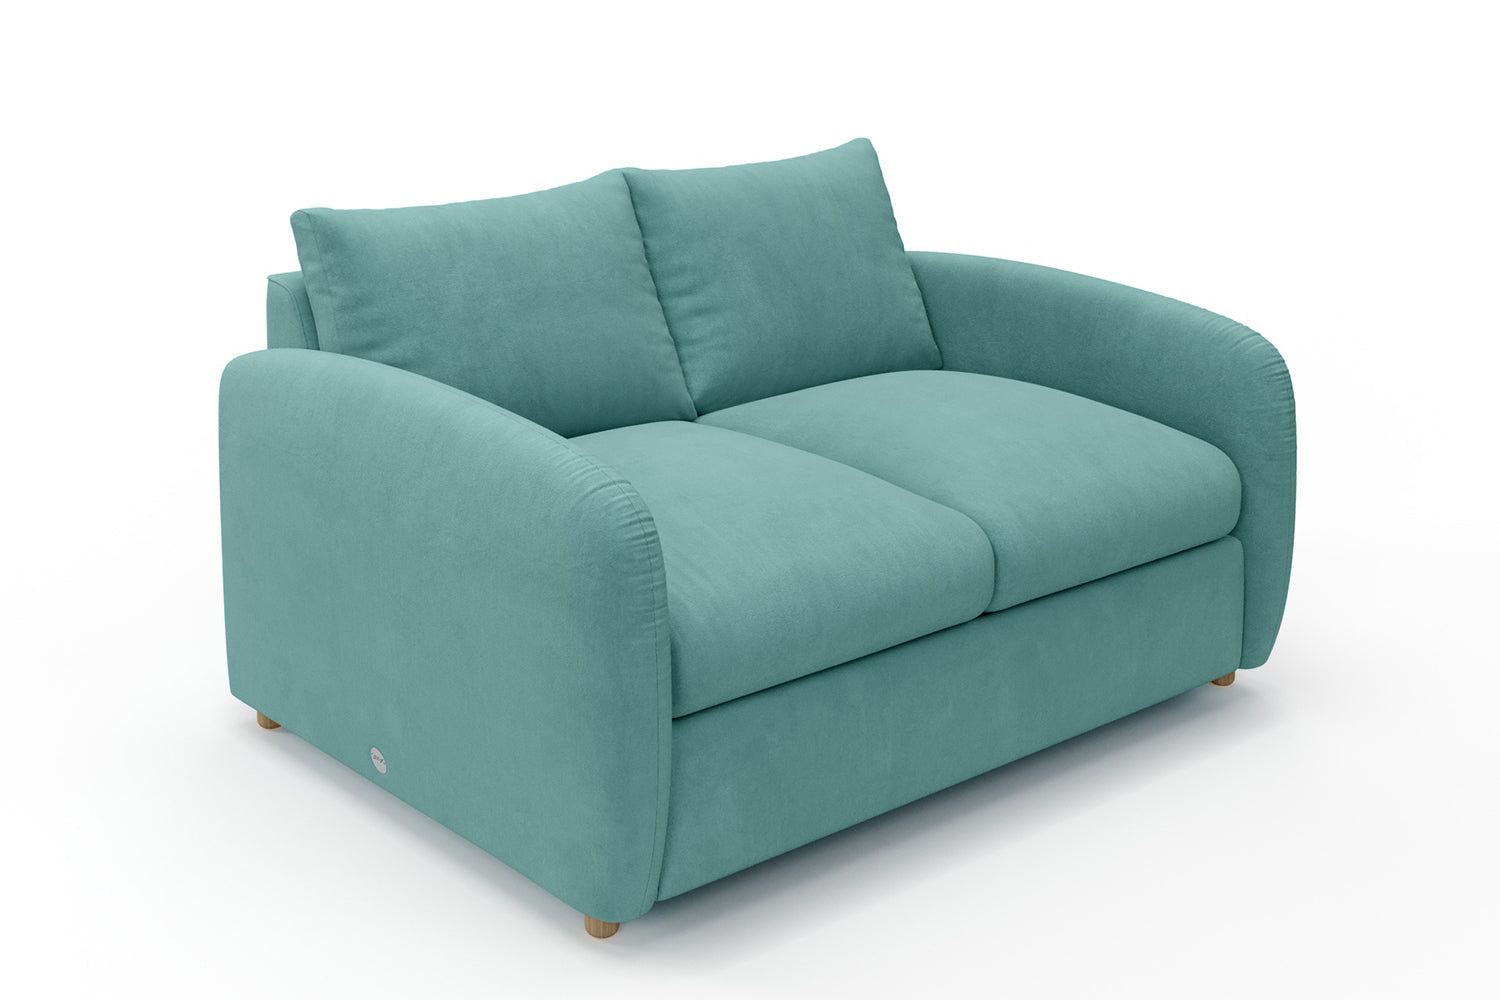 SNUG | The Small Biggie 2 Seater Sofa in Soft Teal